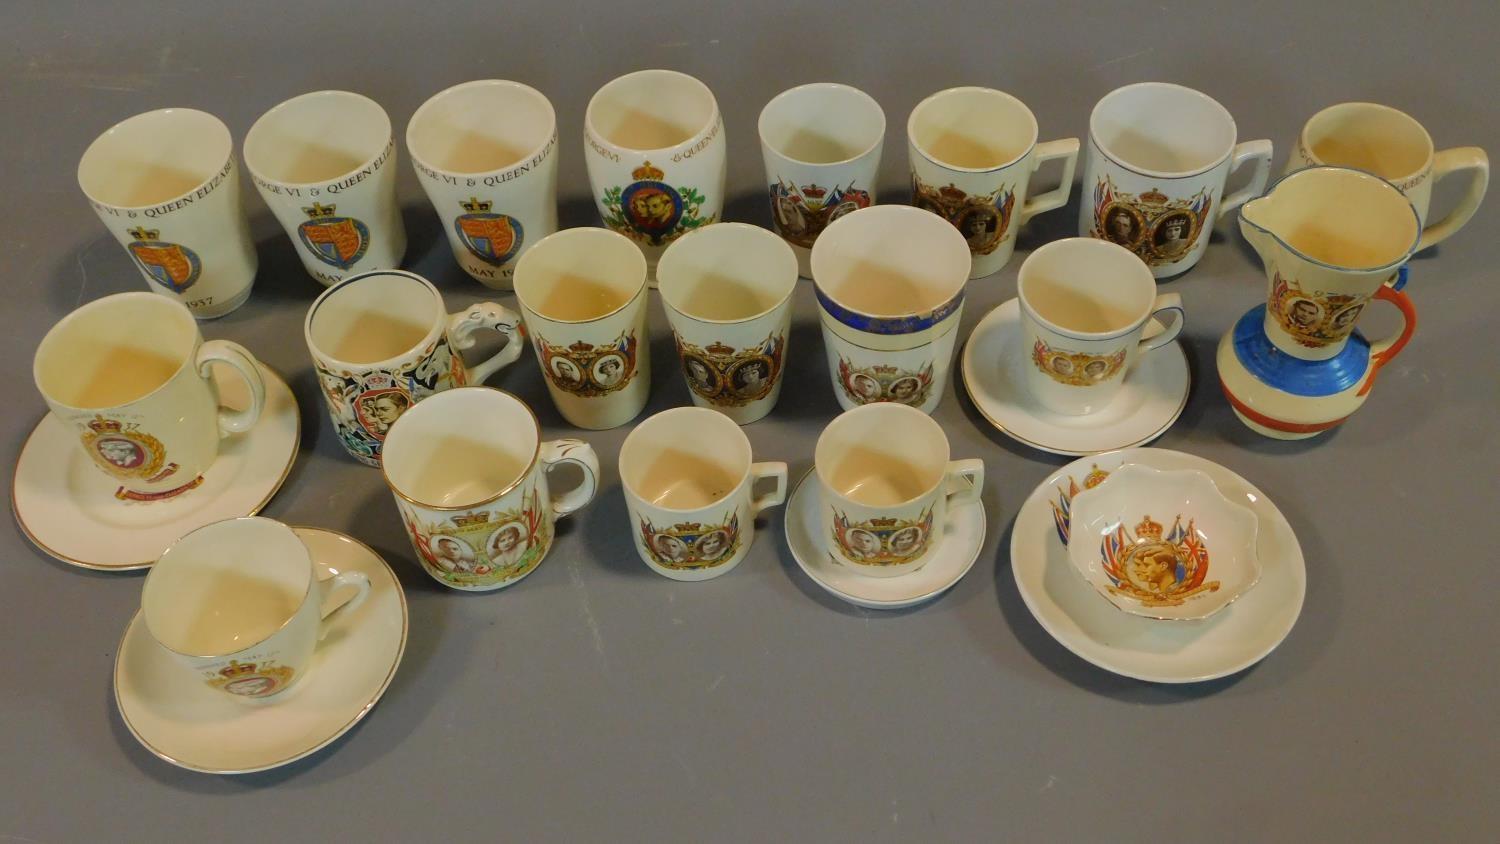 A collection of Royal commemorative mugs for George and Elizabeth